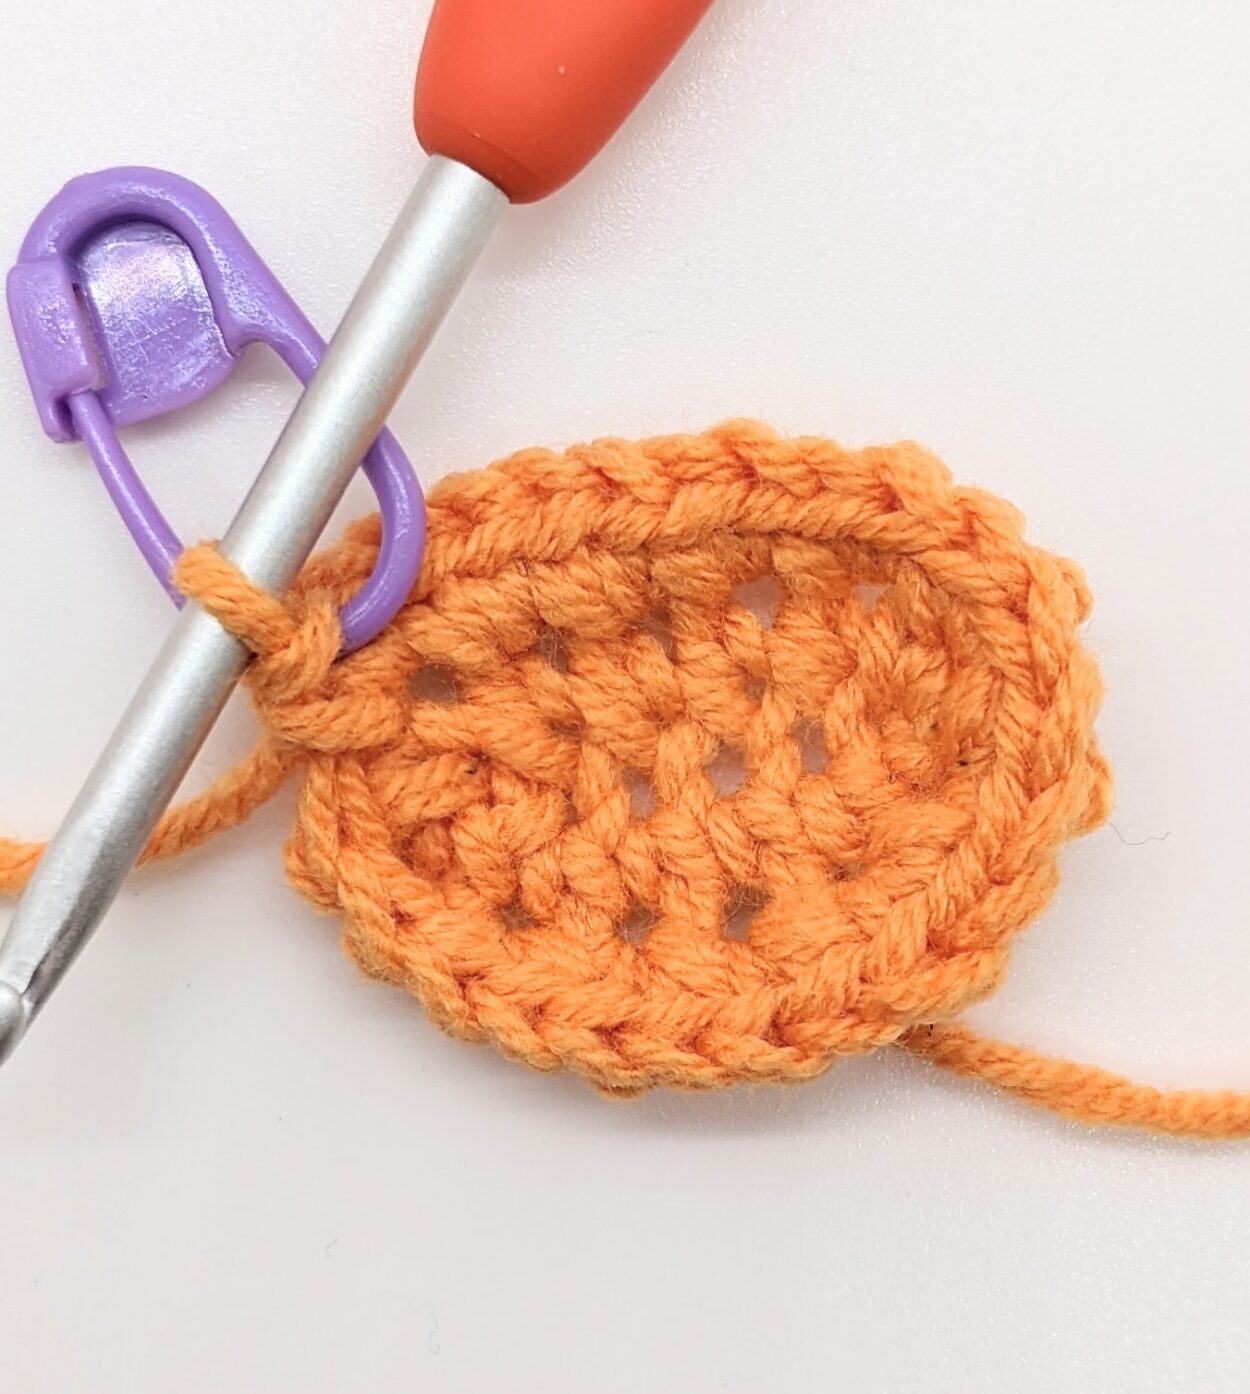 How to Crochet an Oval around a Foundation Chain (amigurumi) - Little World  of Whimsy